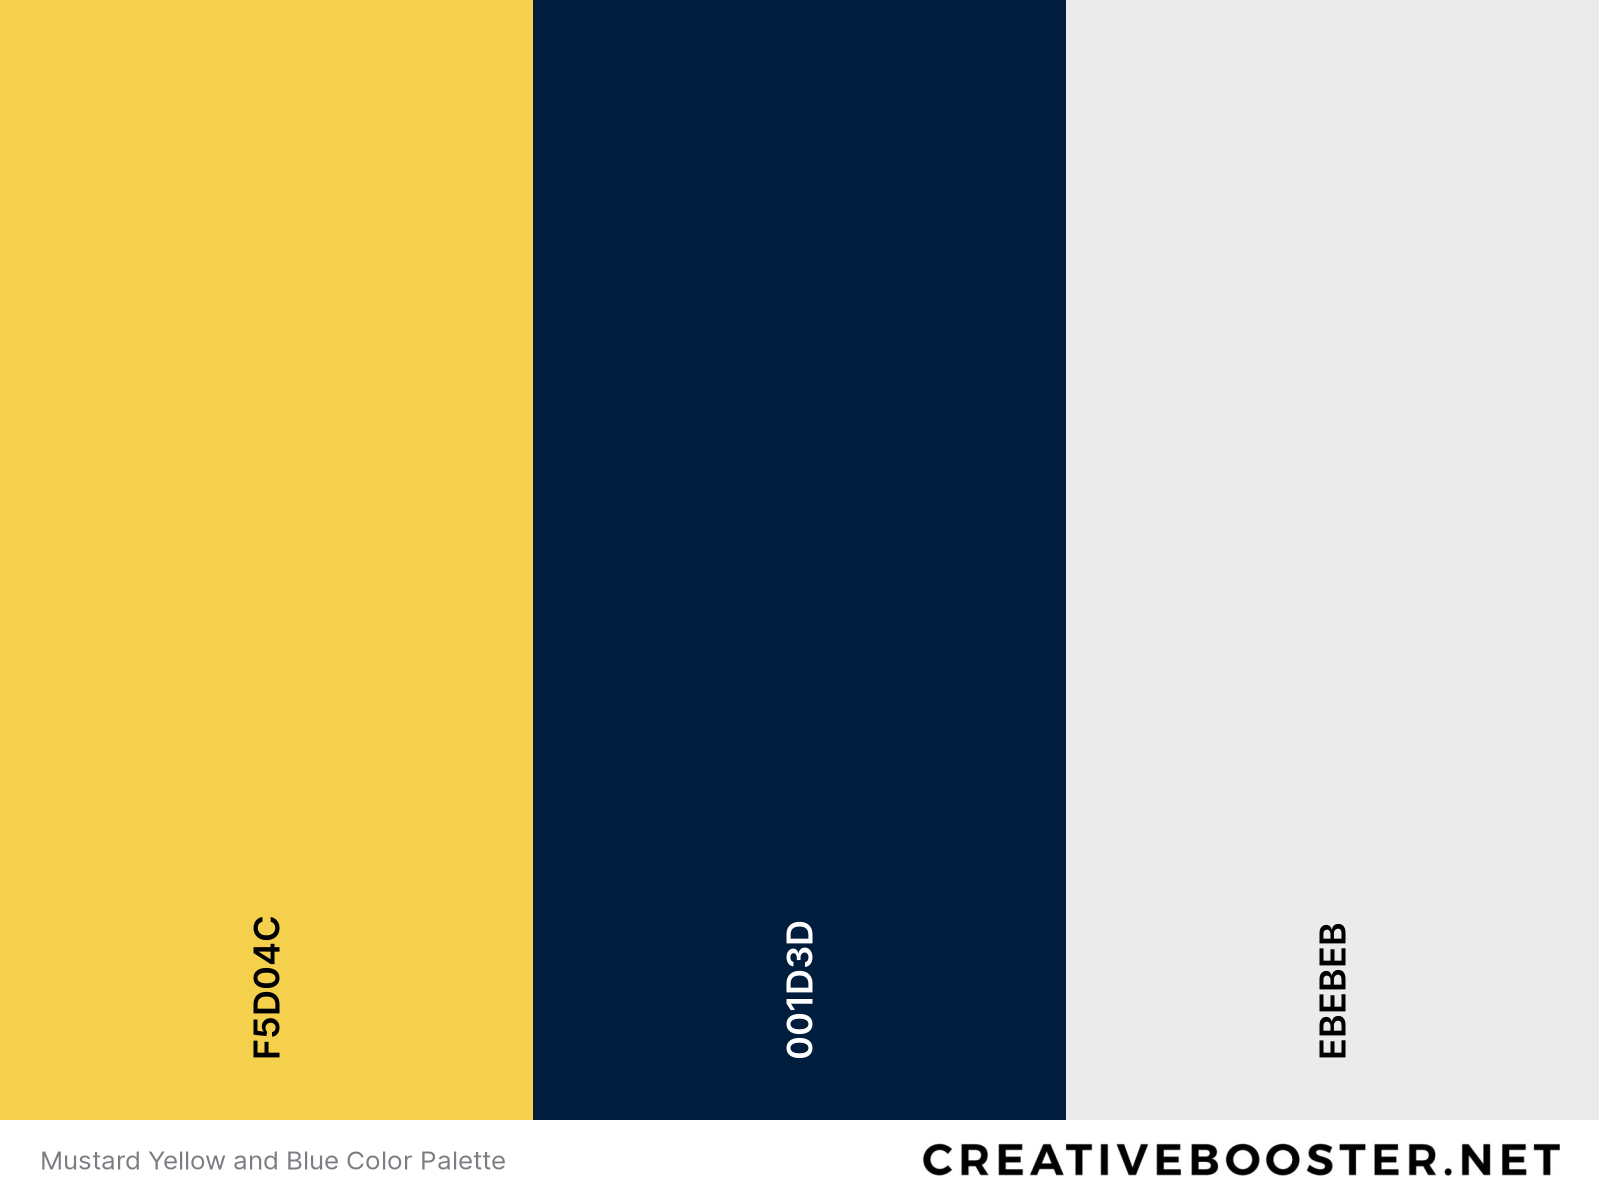 Mustard Yellow and Blue Color Palette